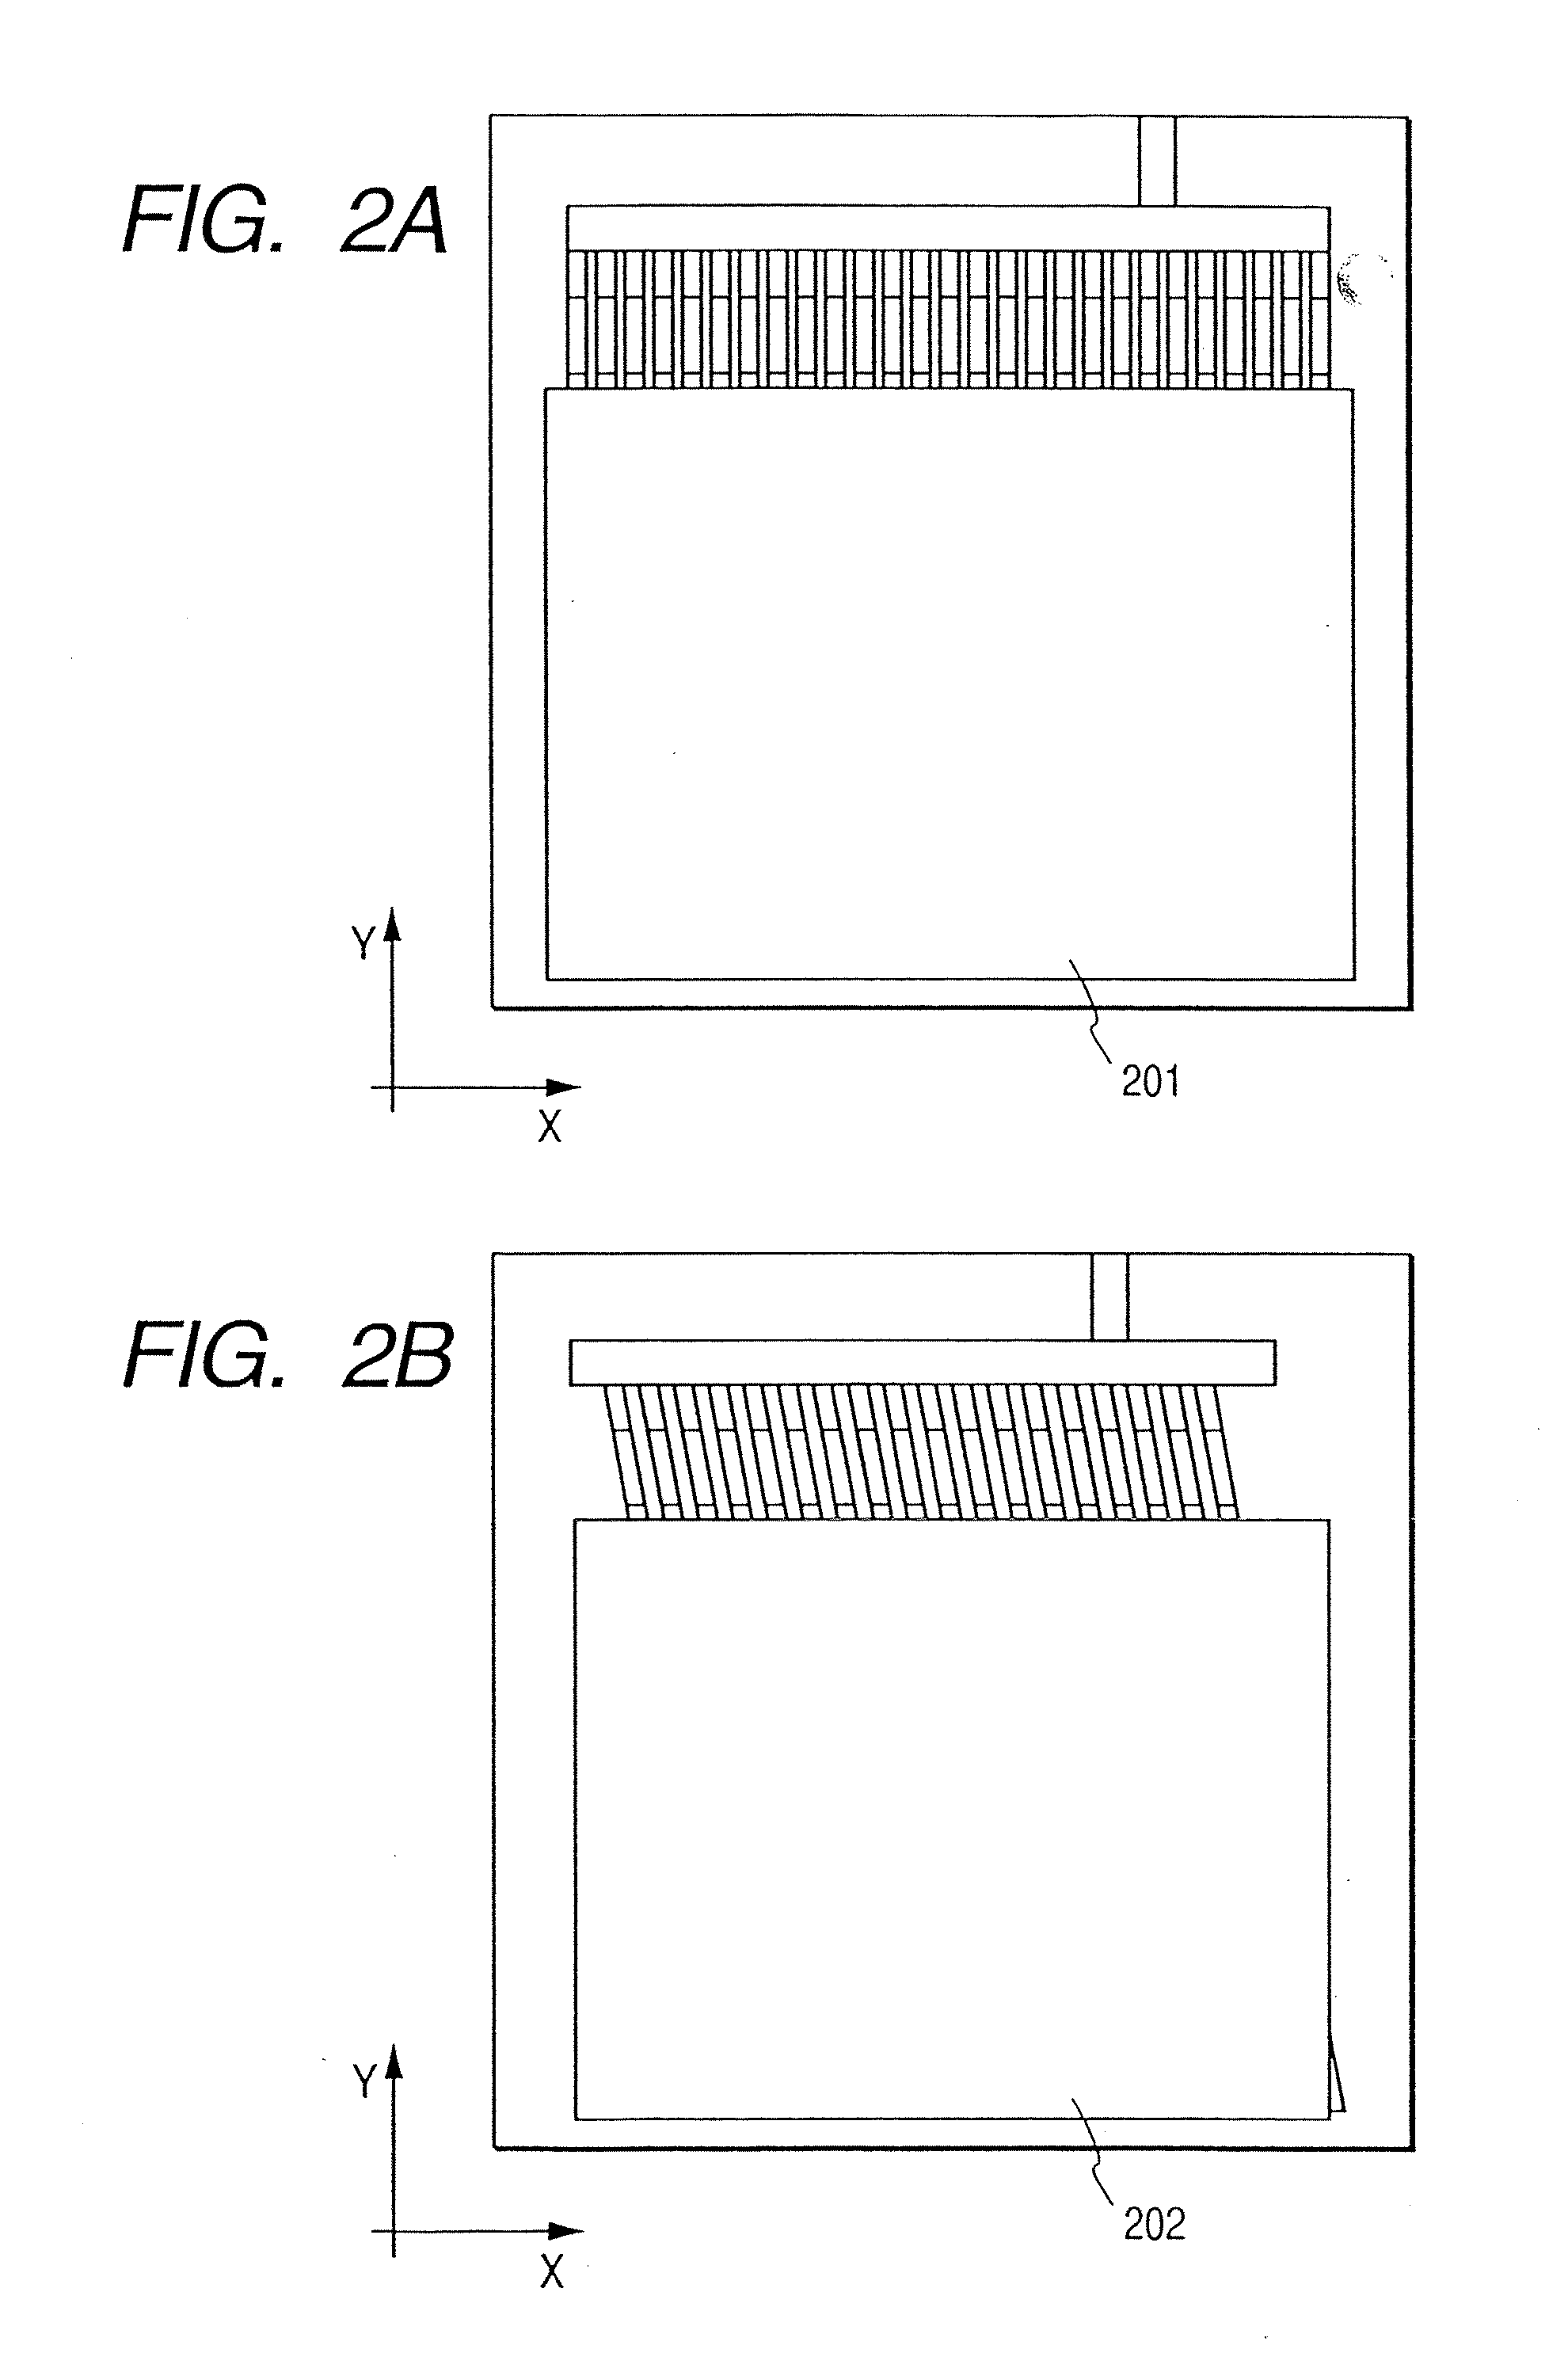 Electron emission apparatus comprising electron-emitting devices, image-forming apparatus and voltage application apparatus for applying voltage between electrodes